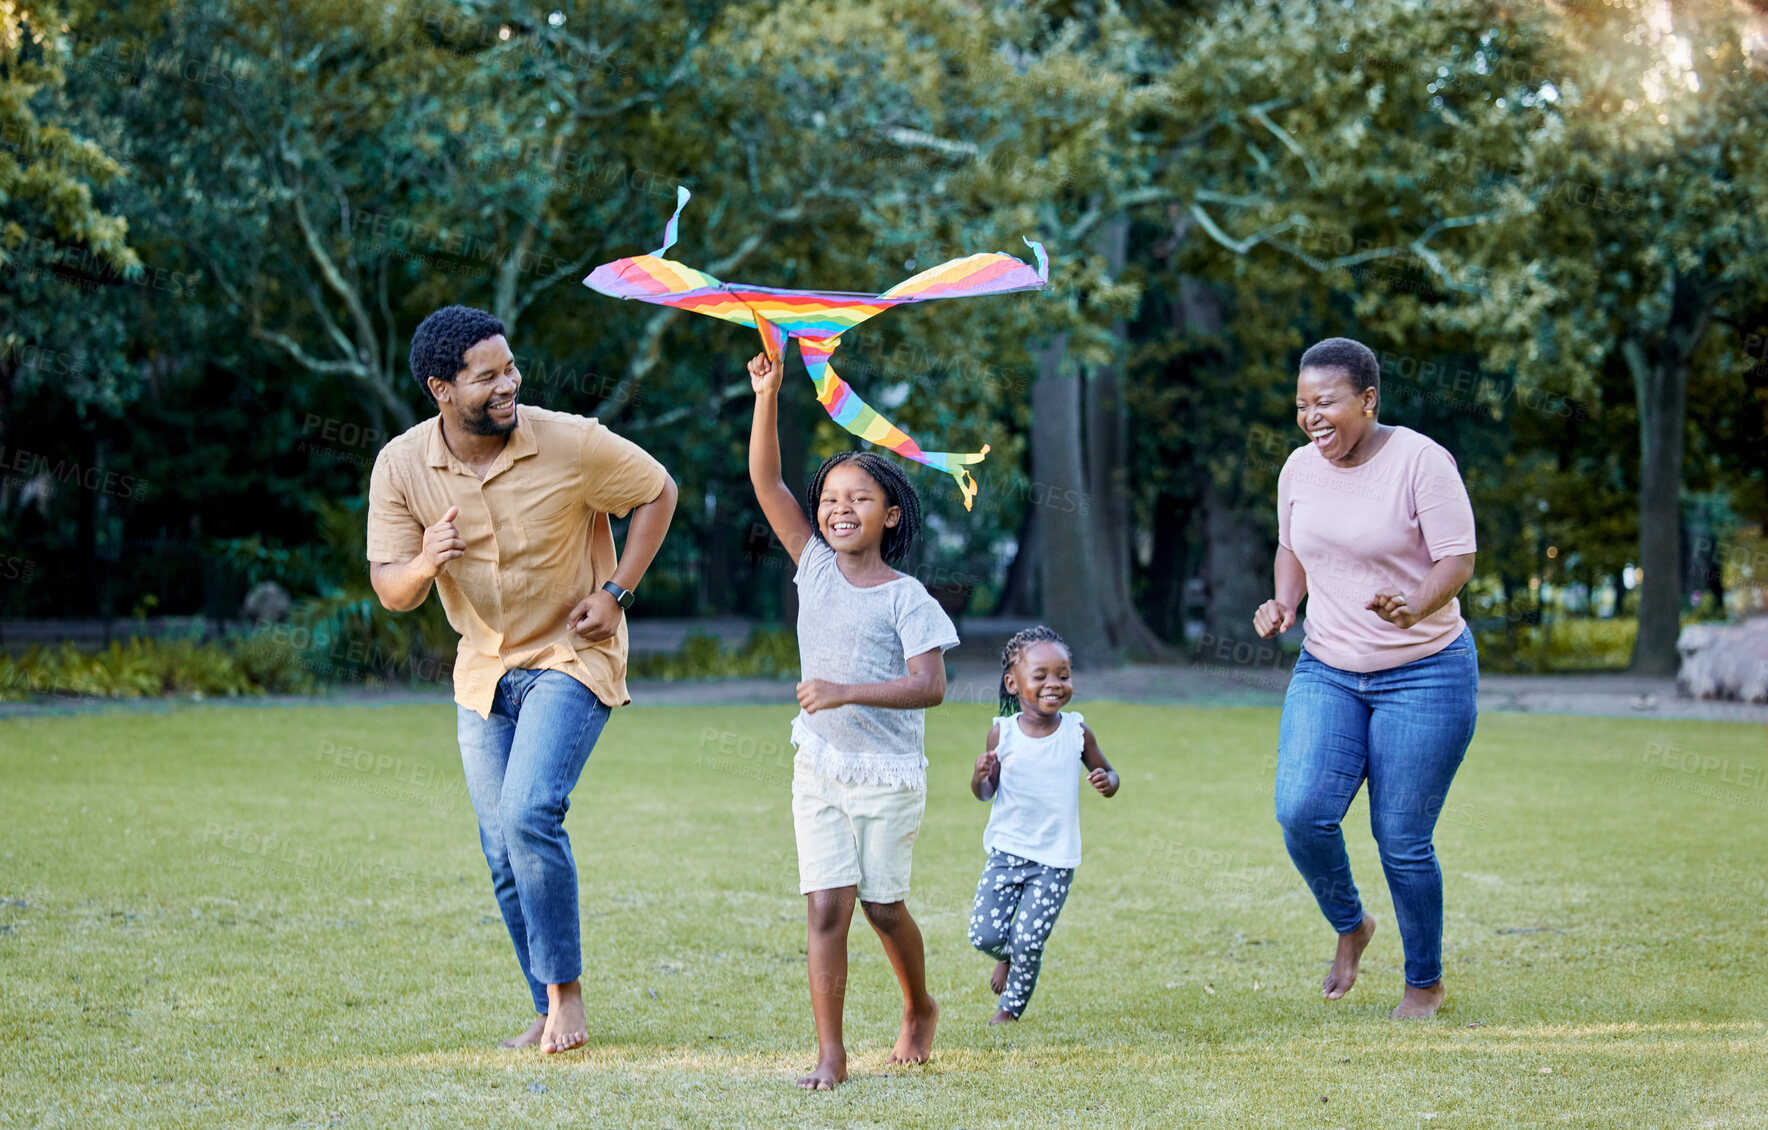 Buy stock photo Black family, kite and outdoor fun with parents and children having fun and playing outside at a park in nature. Energy, love and running while being active and bonding with man, woman and kids